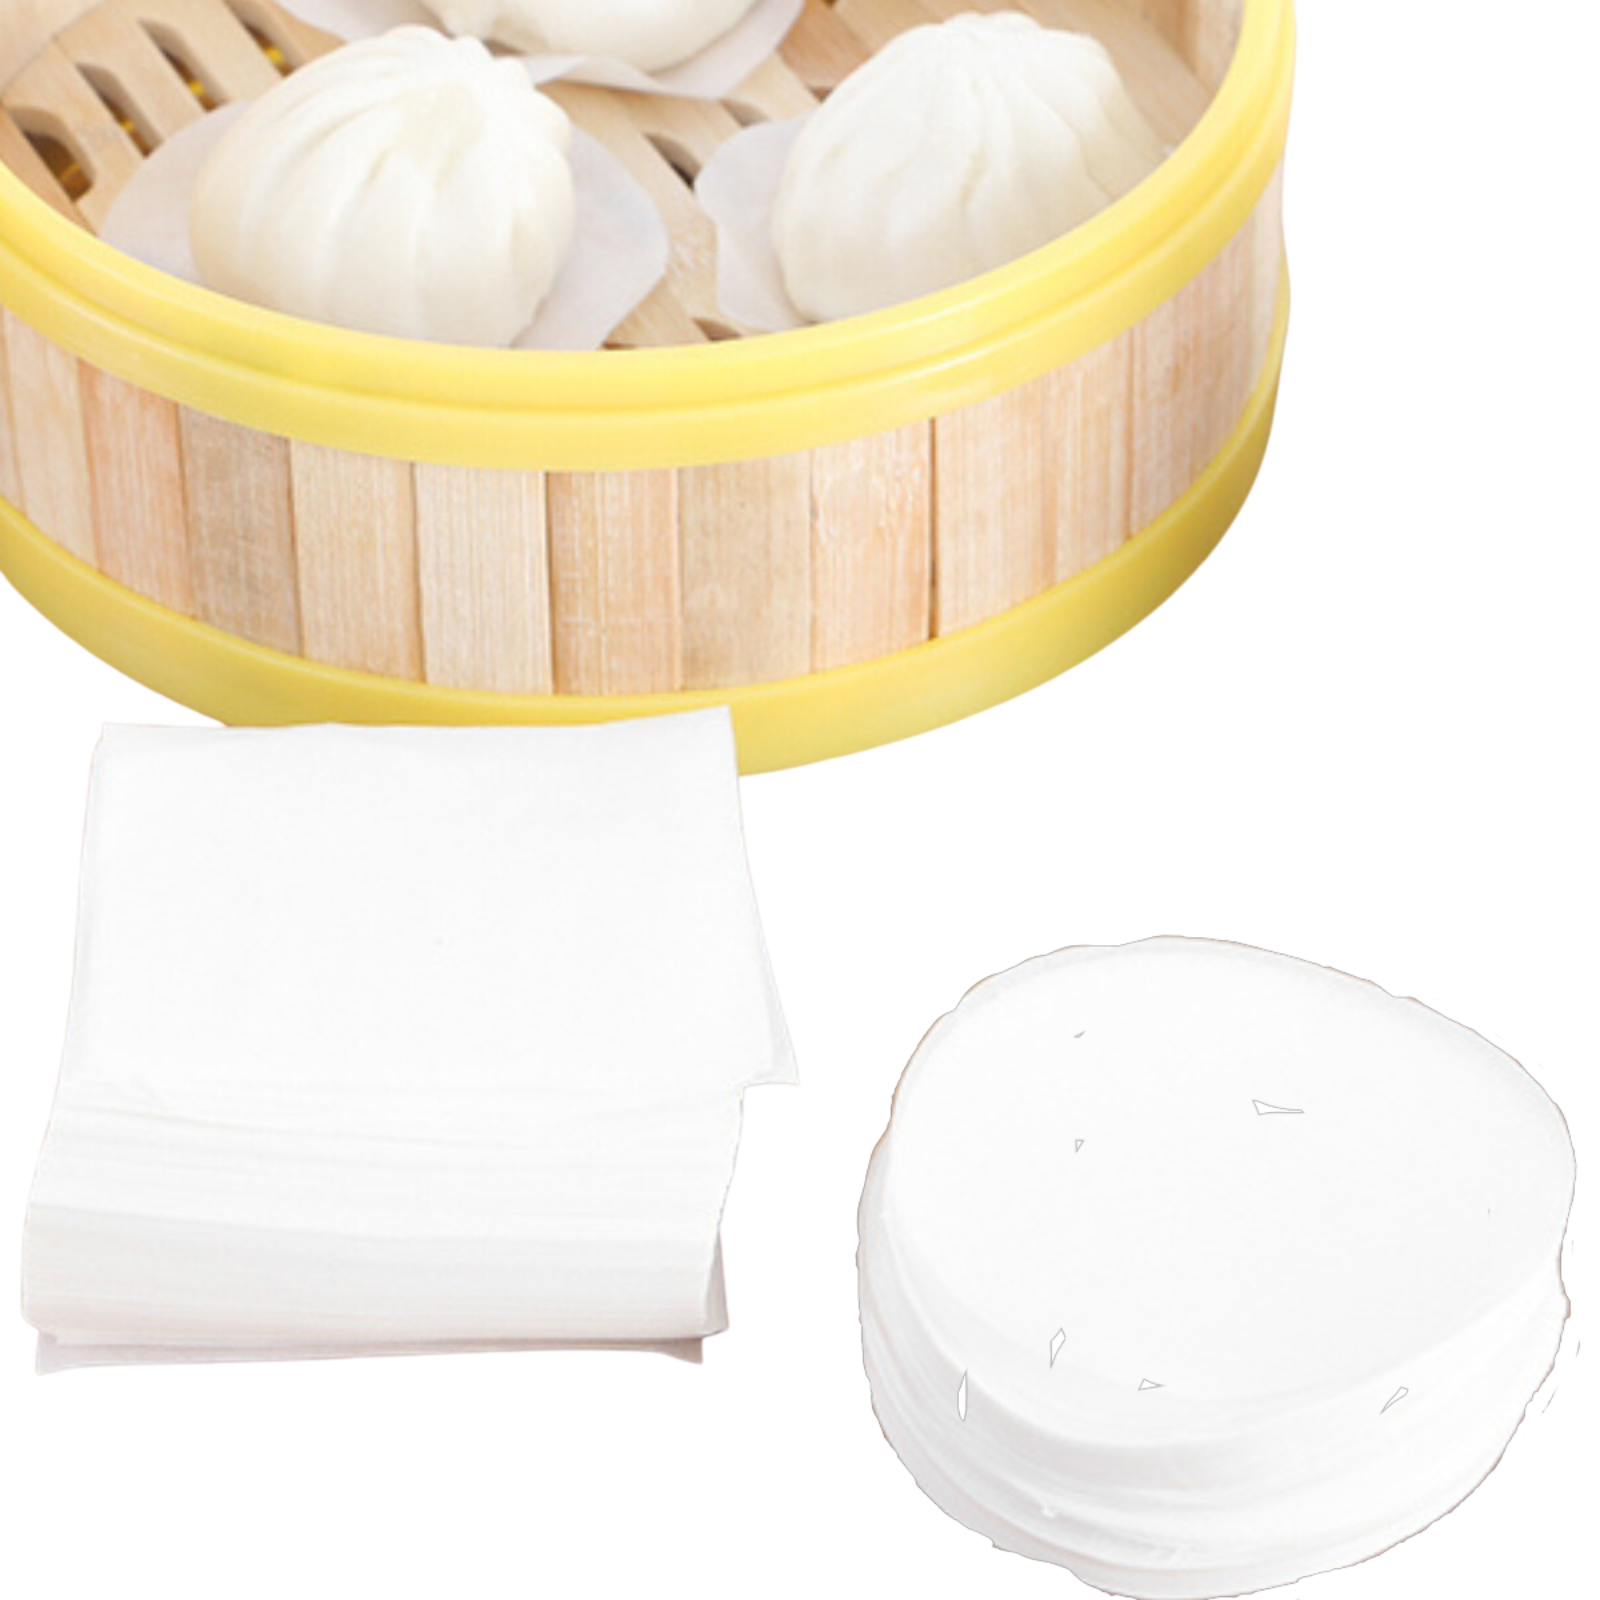 Round and Square Liners for Buns, Dumplings, and Other Dim Sum (500 pieces)